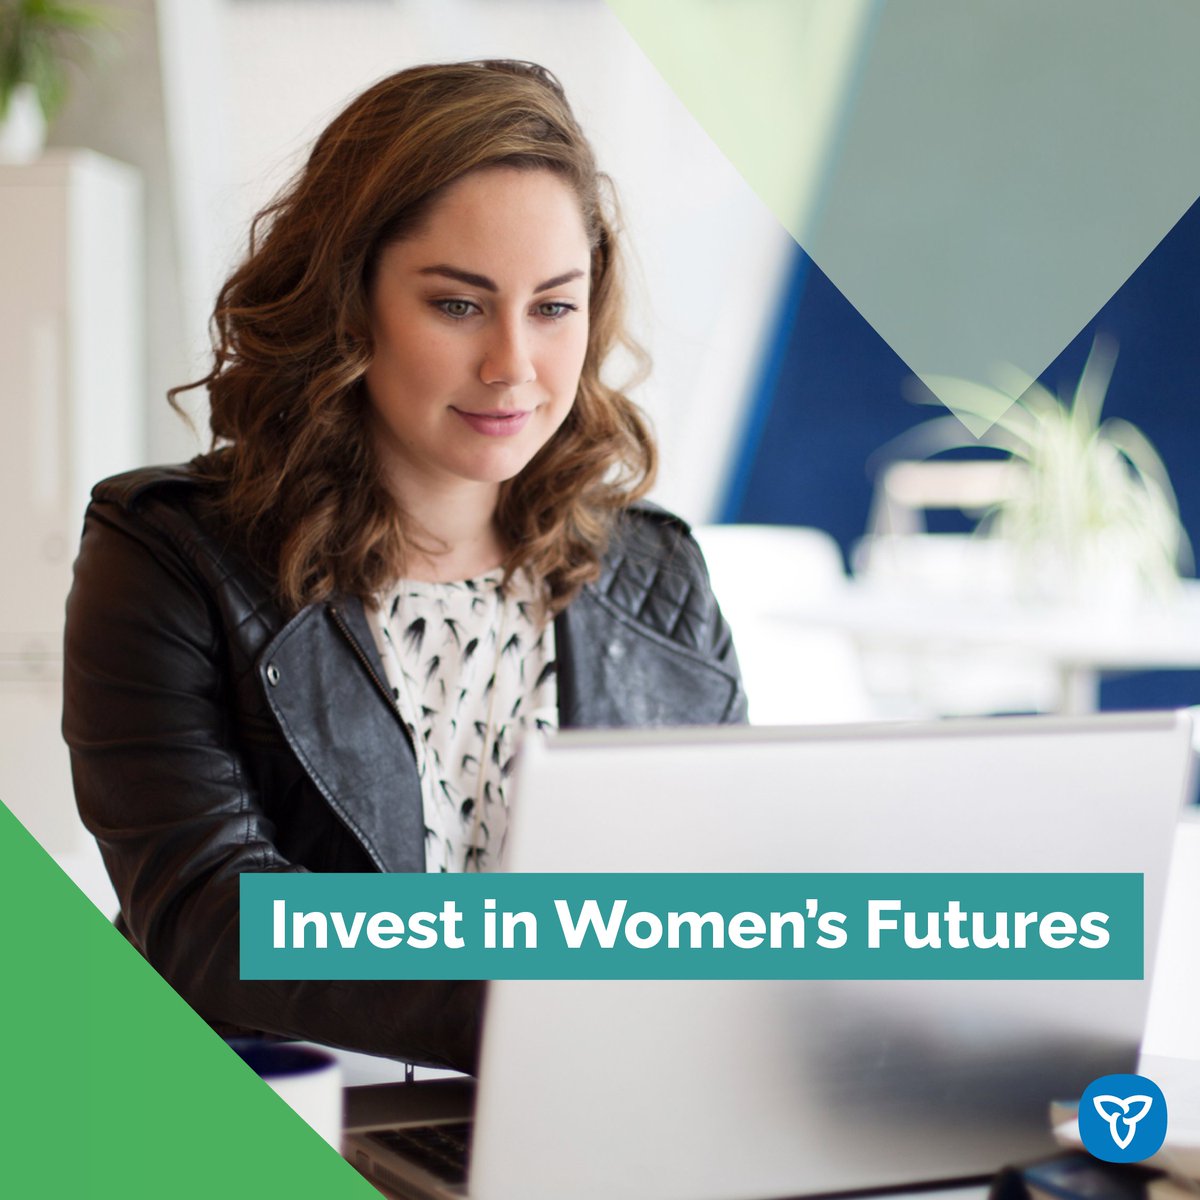 When women succeed, Ontario succeeds. Find out how the Investing in Women’s Futures program helps women access the supports needed to find a job, start their own business, or pursue further education or training: ontario.ca/page/investing… #WomenEmpowerment #InvestingInWomen